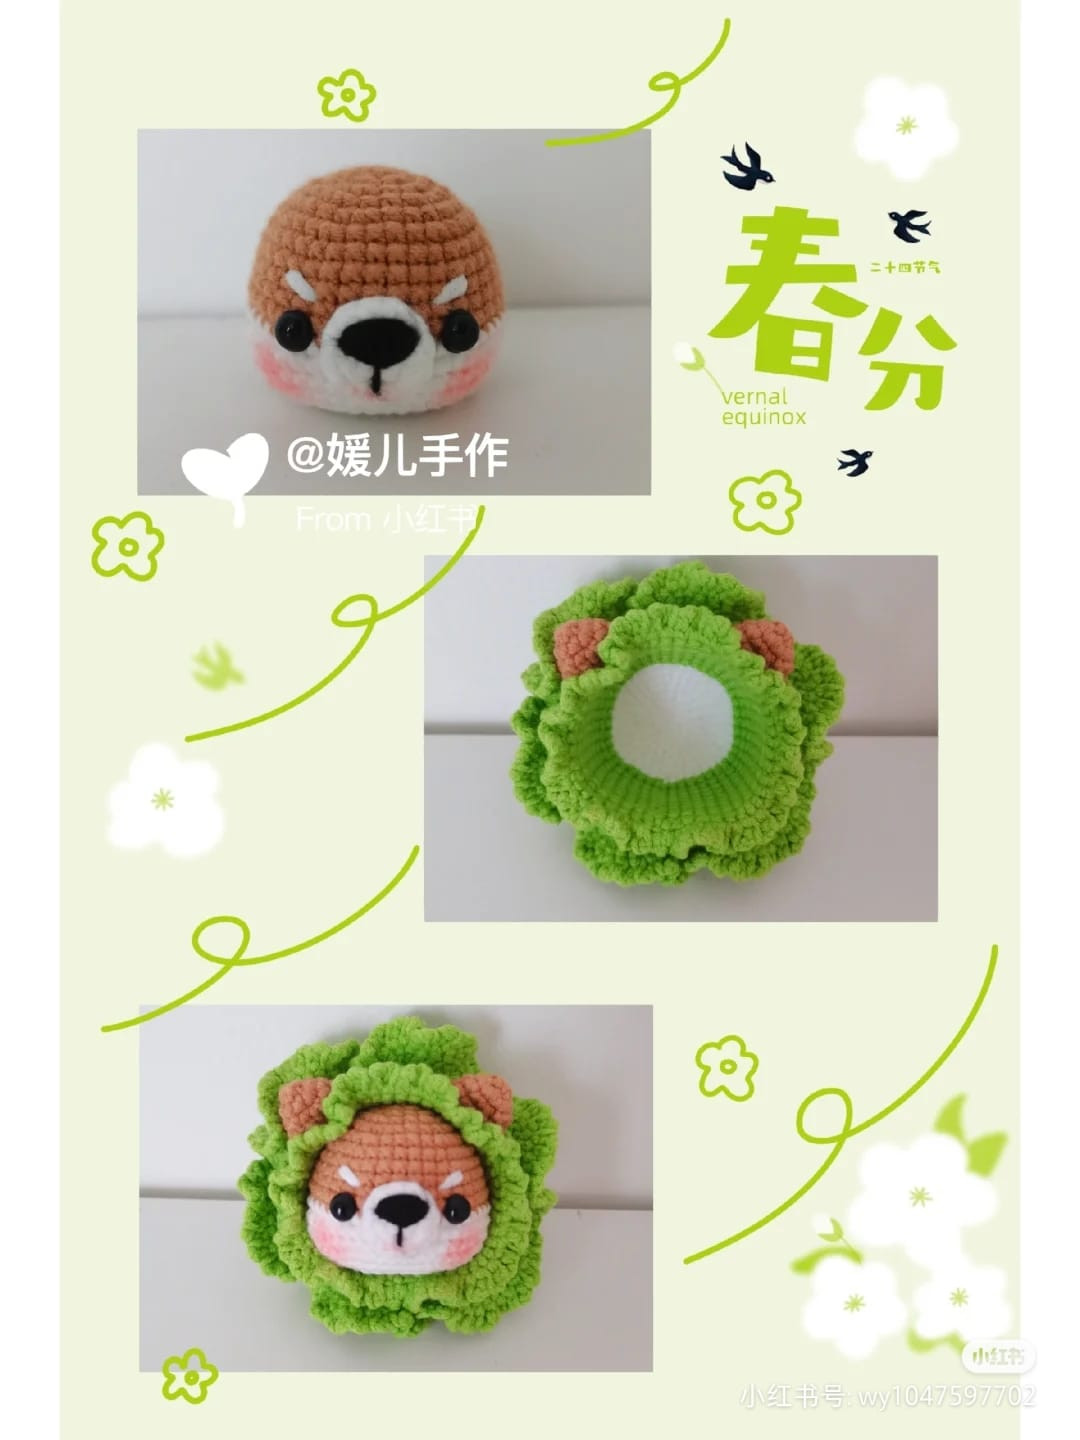 Crochet pattern with a dog's head, wrapped with a green flower rim.